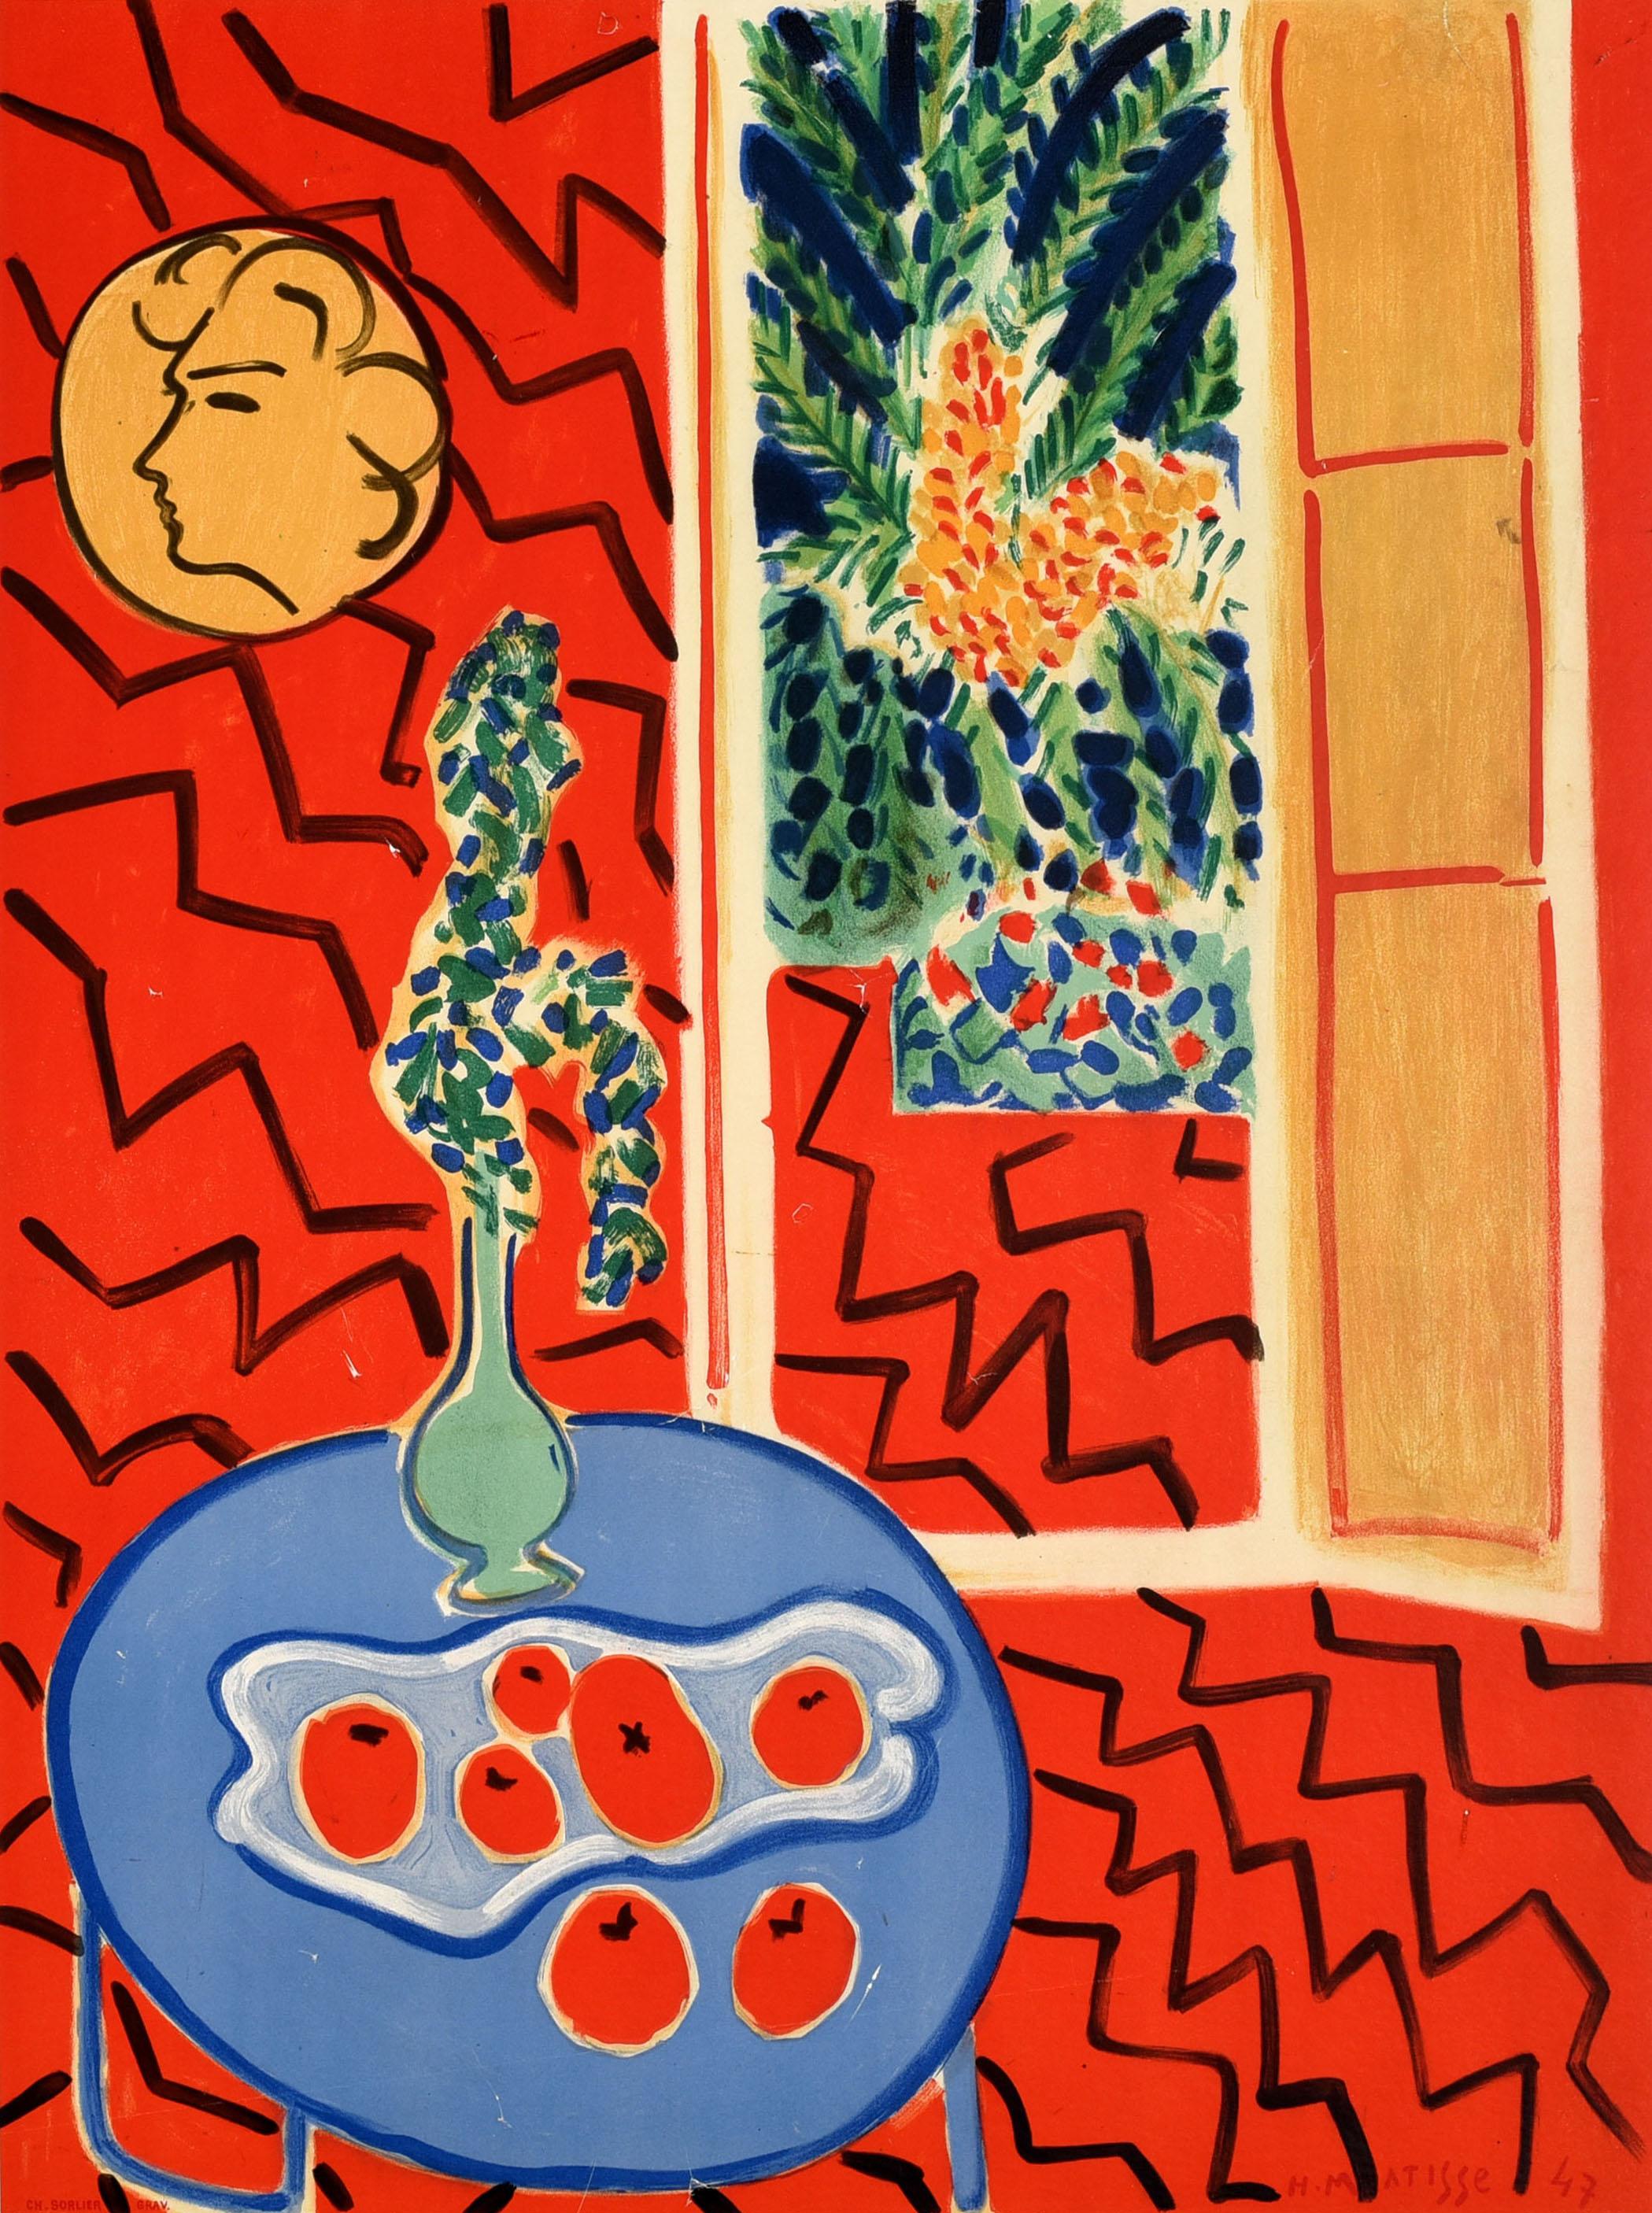 Original vintage art exhibition poster featuring a colourful design by the renowned French artist Henri Matisse (1869-1954) from his 1947 artwork Interieur Rouge Nature Morte sur Table Bleue / Red Interior Still Life on a Blue Table depicting a vase